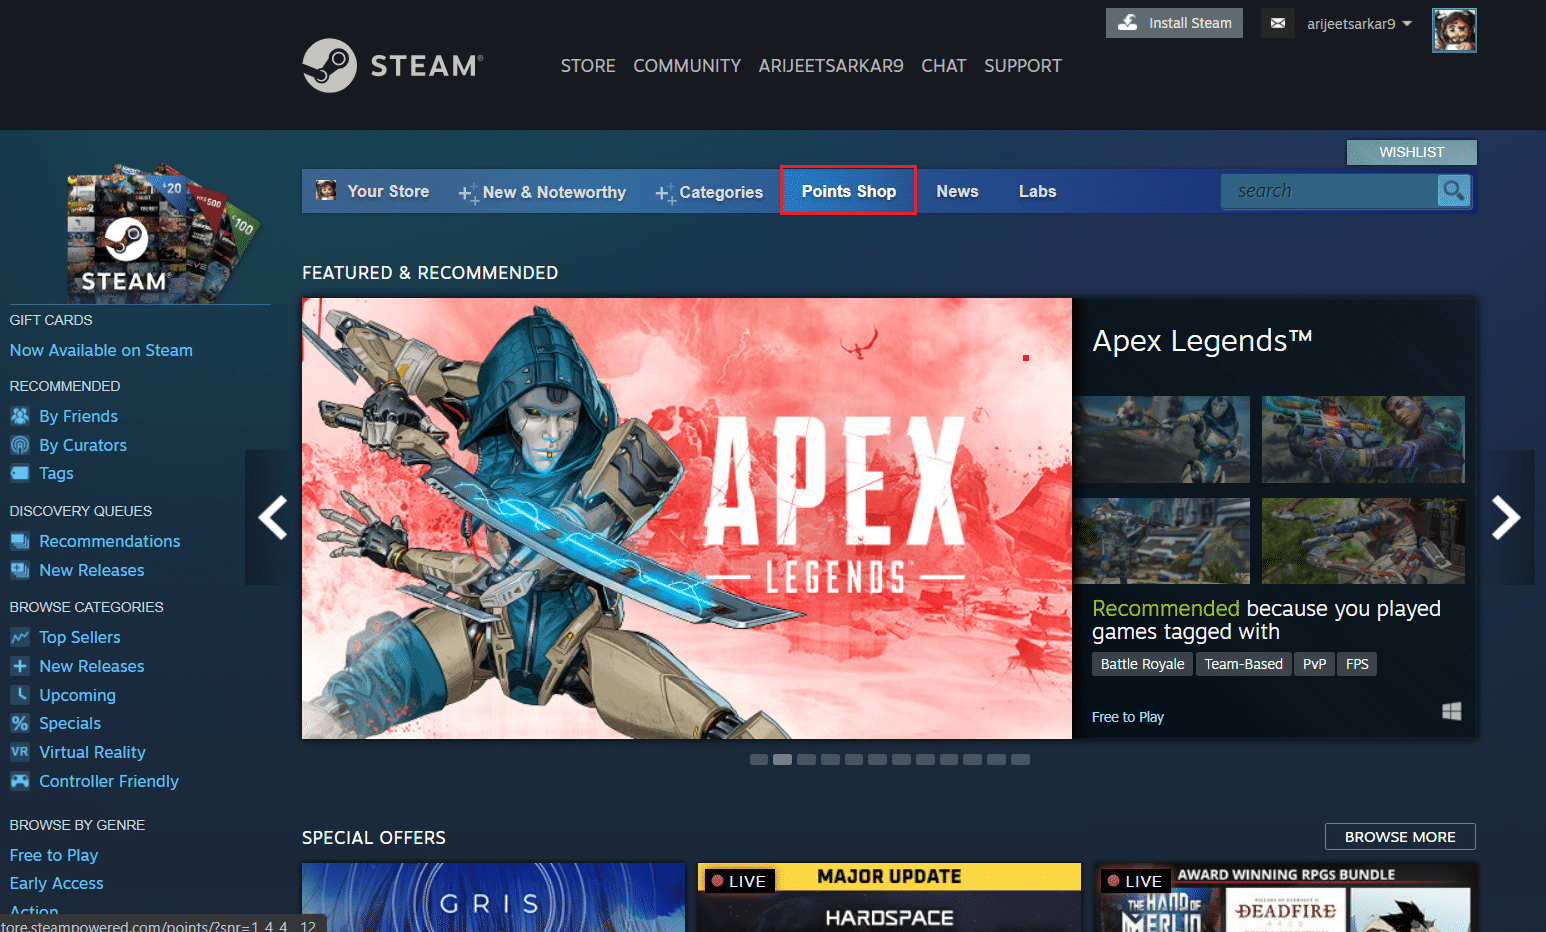 click on Points Shop button in the Steam Store page on browser